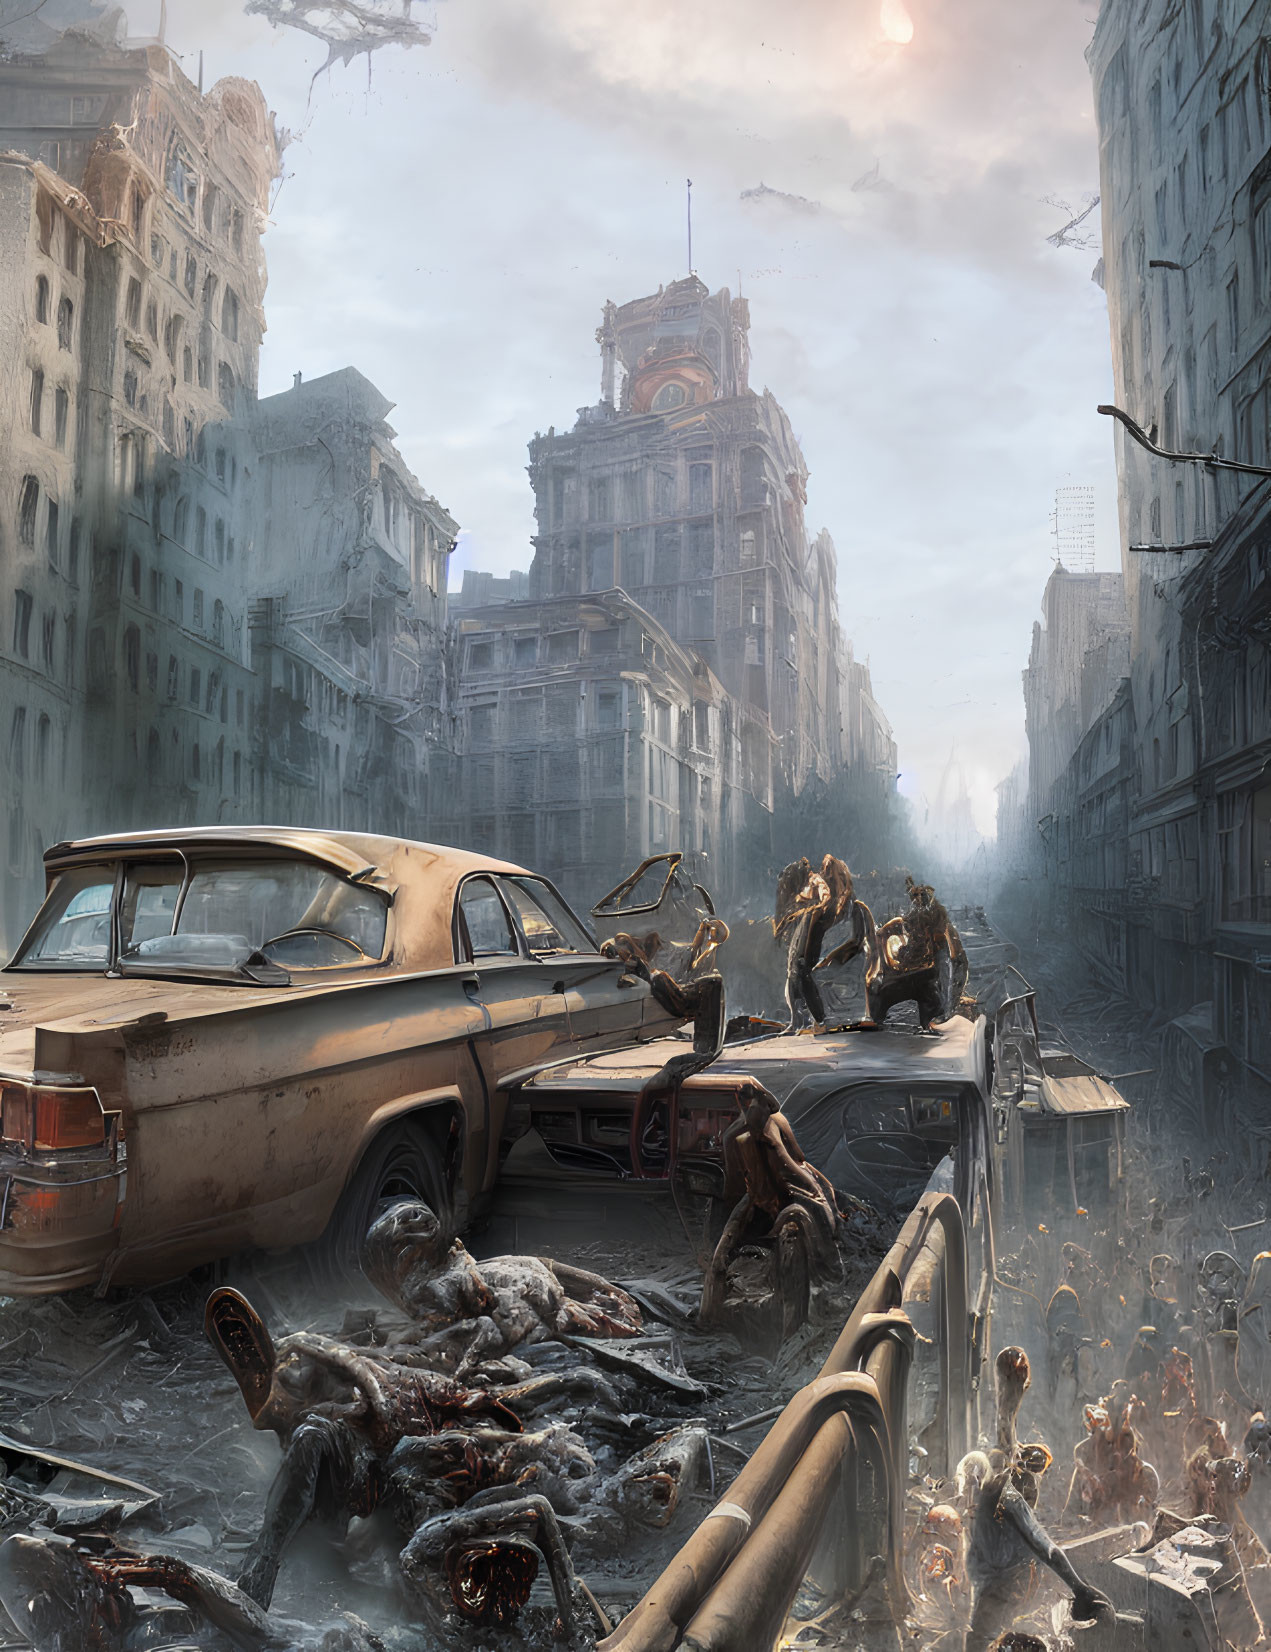 Desolate post-apocalyptic cityscape with ruins and creatures